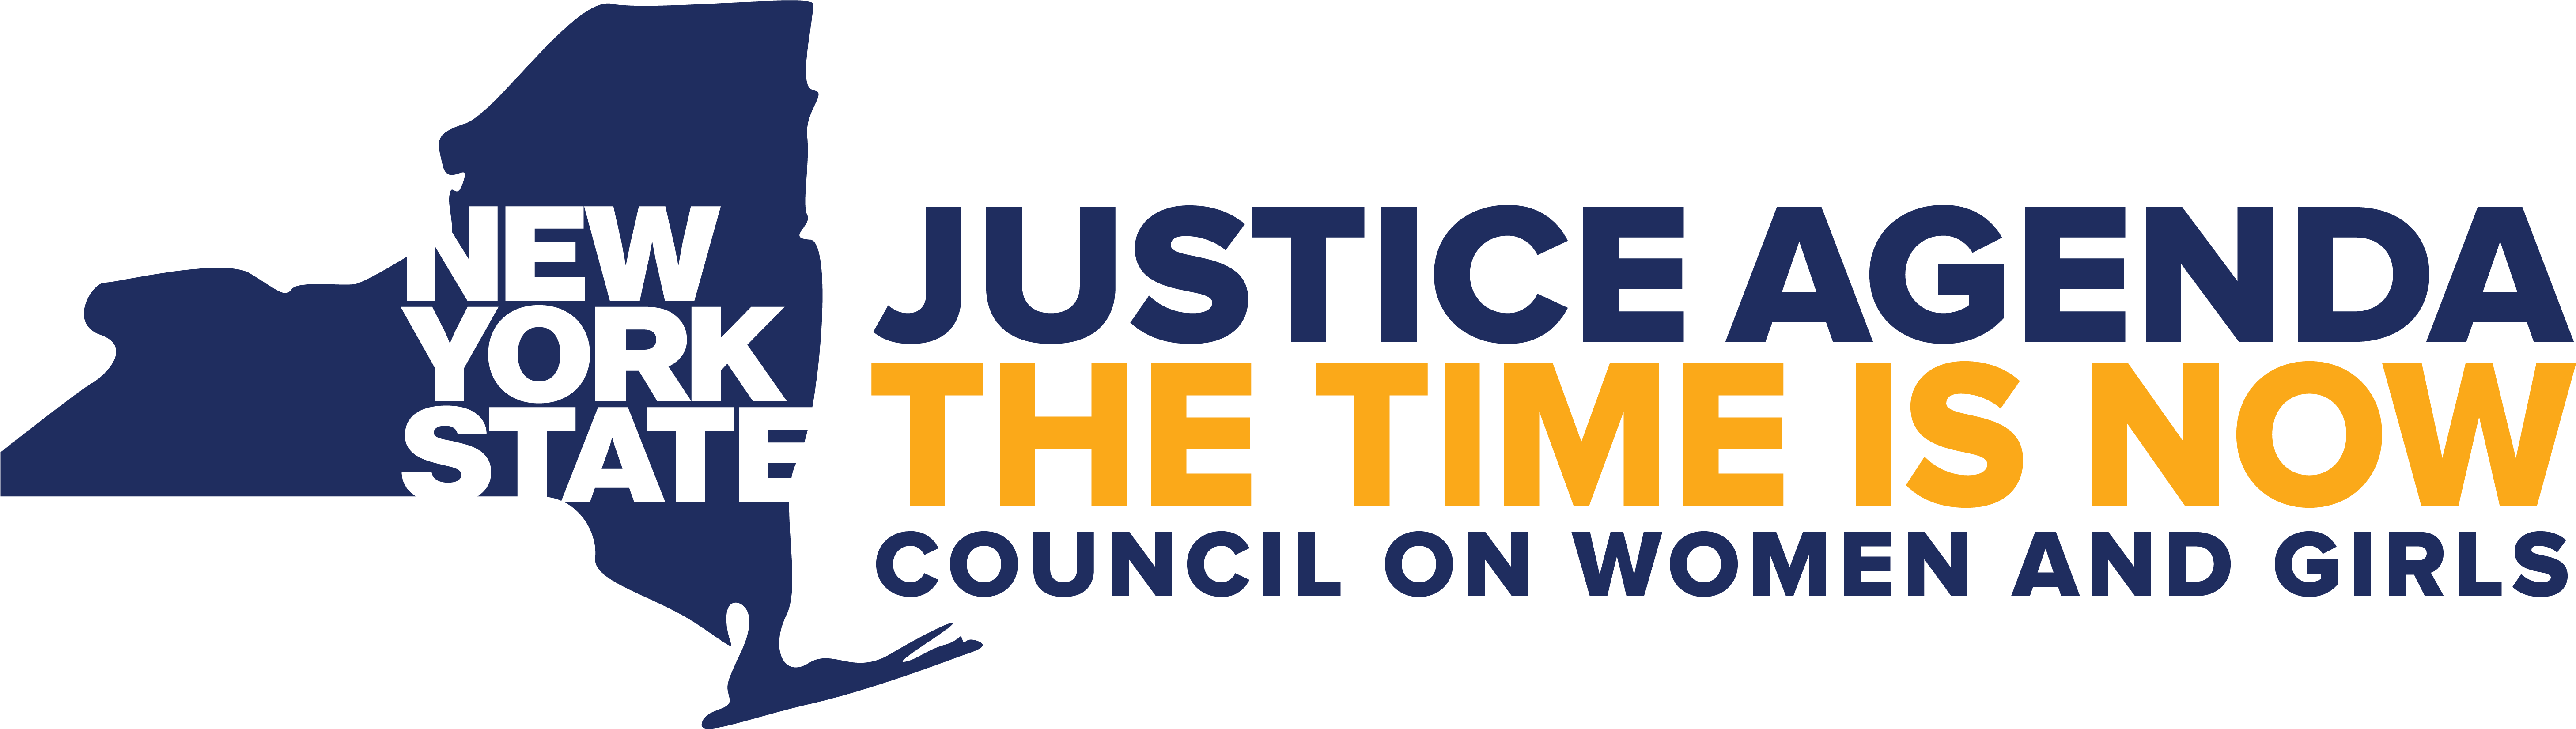 New York State Justice Agenda Councilon Womenand Girls Logo PNG